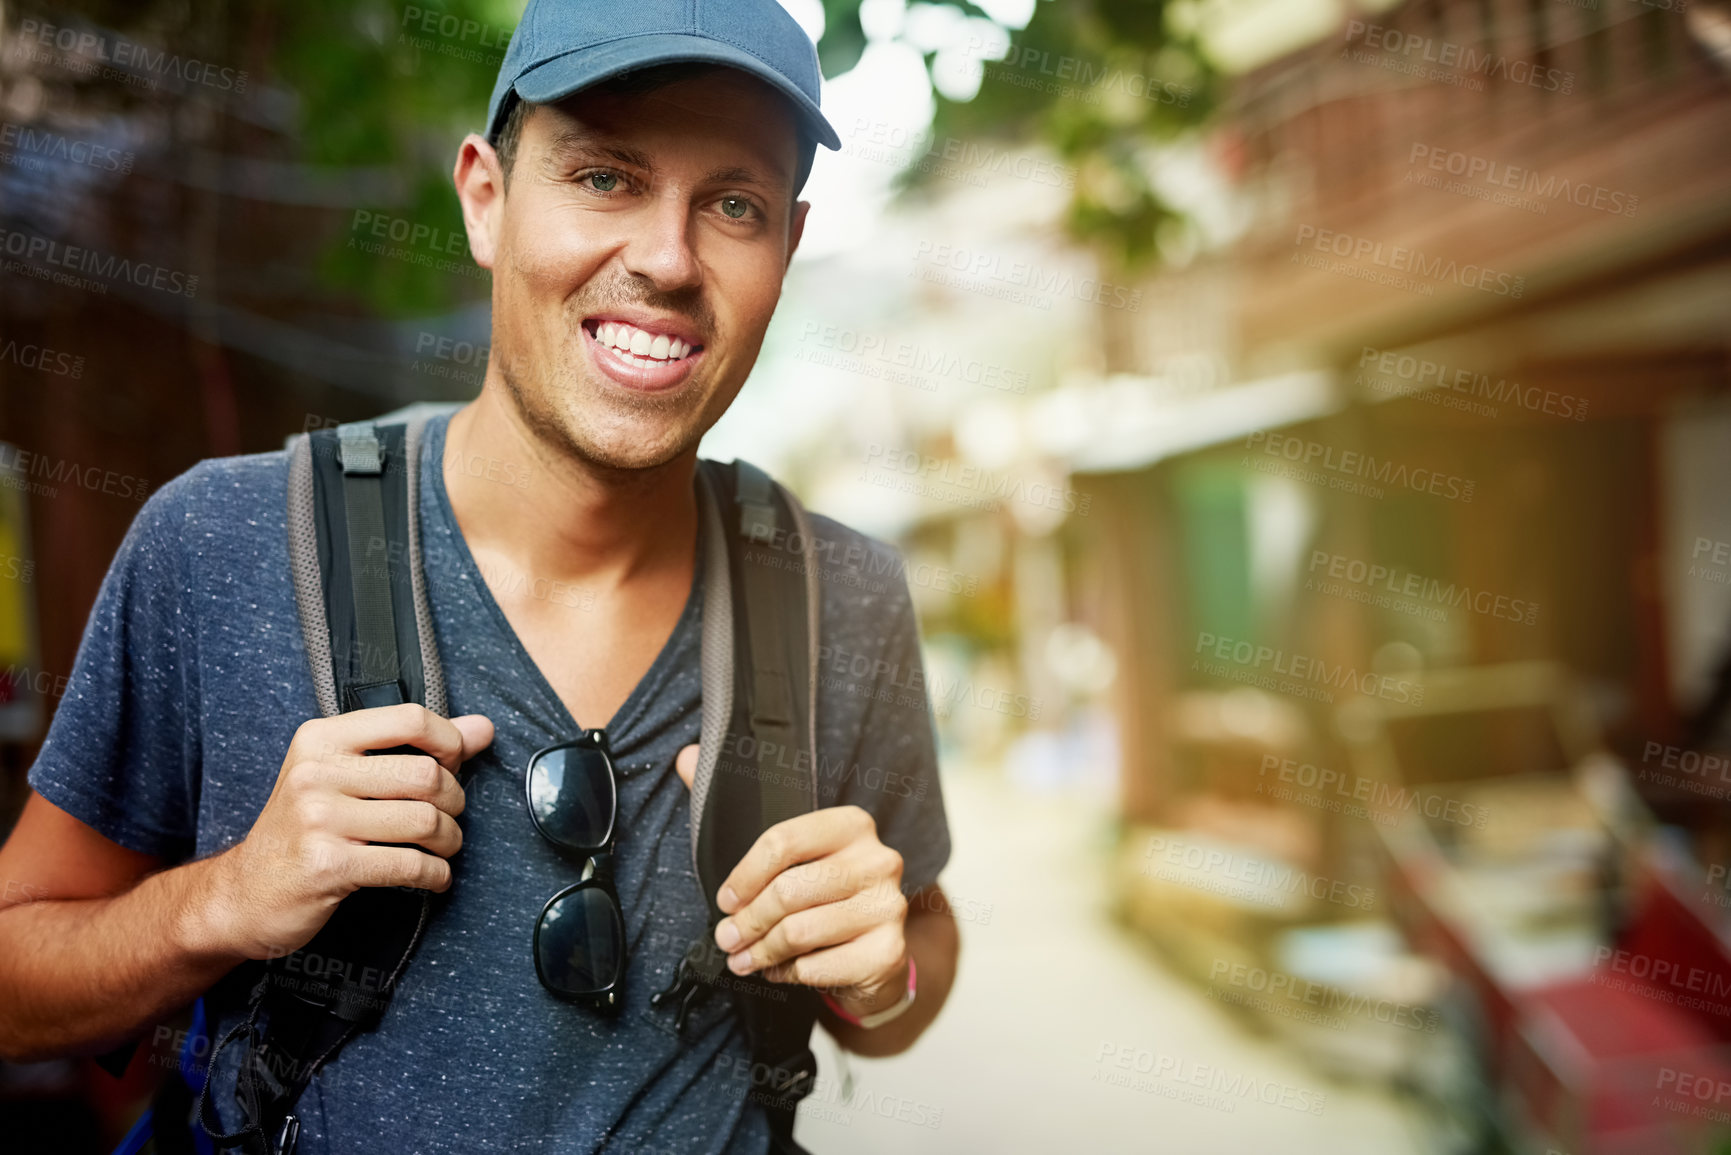 Buy stock photo Portrait of a smiling young man wearing a backpack traveling in Thailand